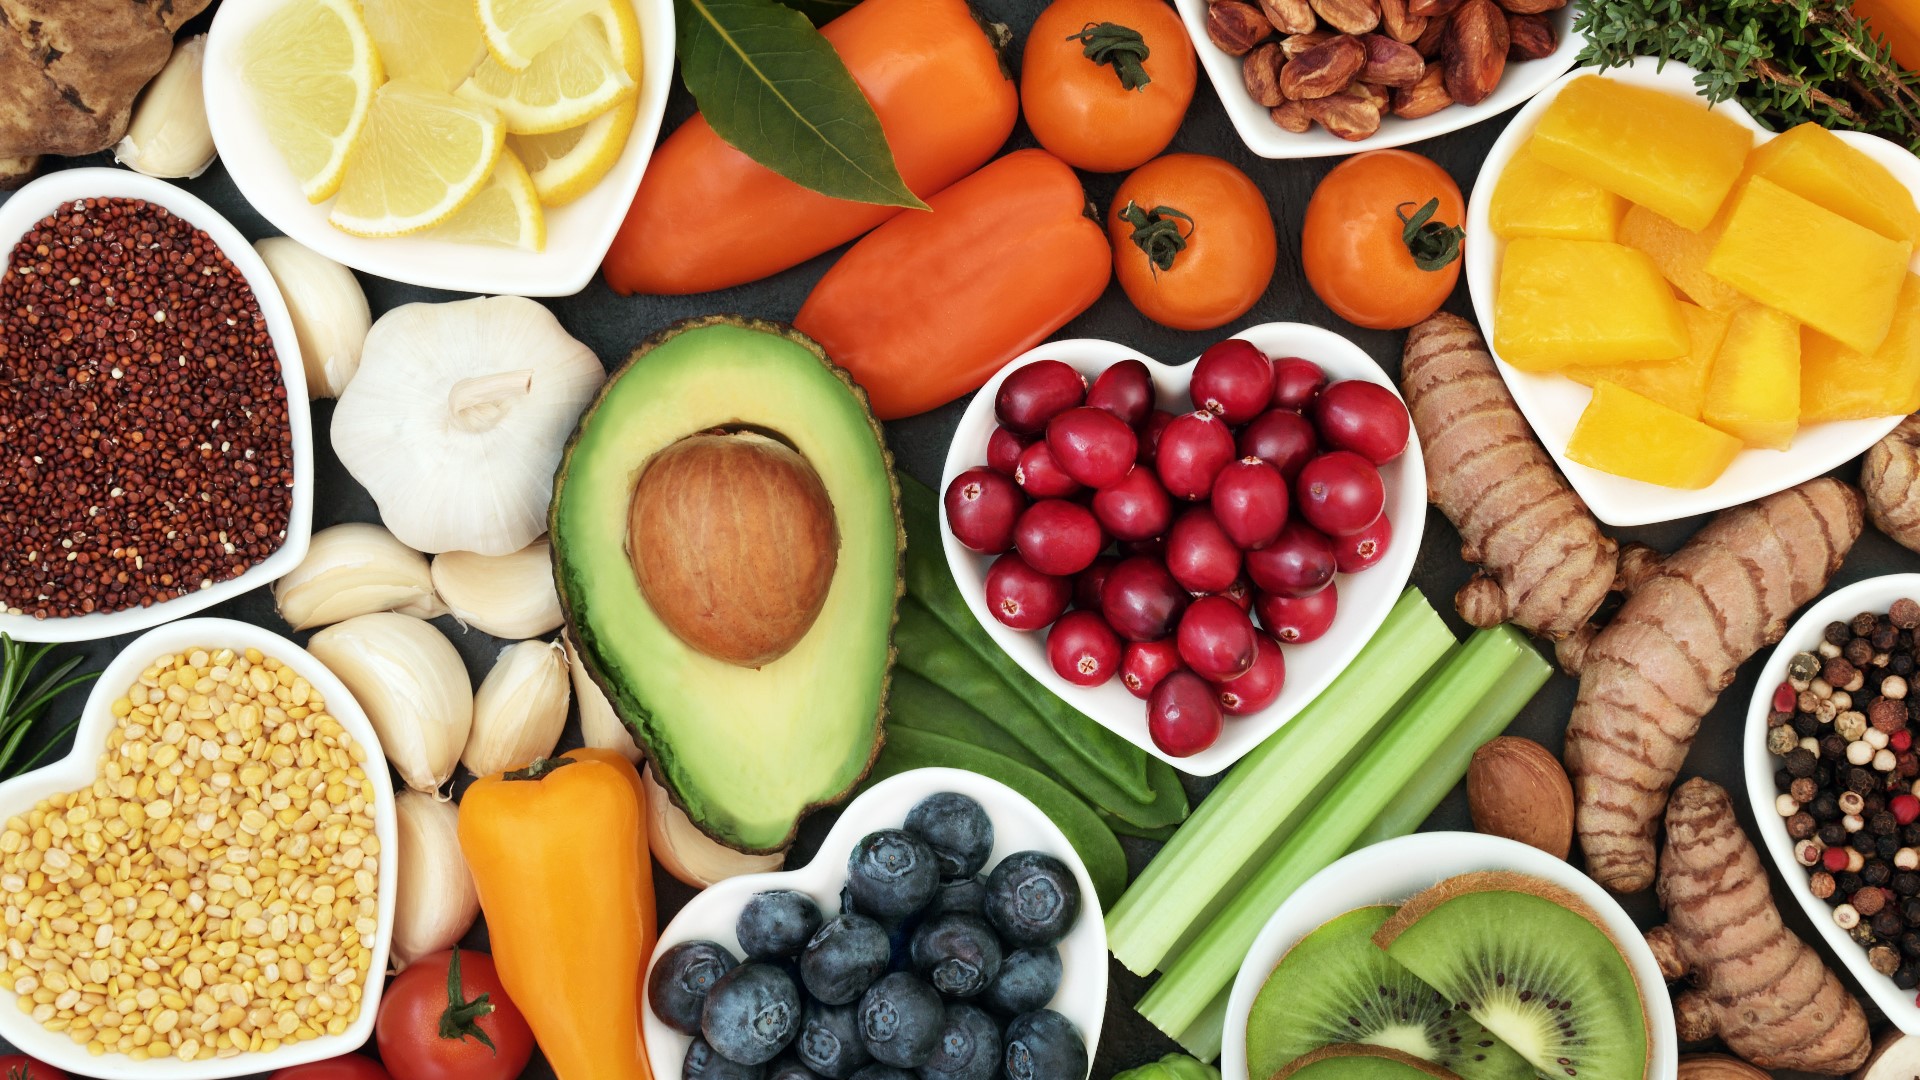 Did you know that certain foods actually benefit the body part that they resemble? Registered Dietitian Jaime Coffey Martinez of Nutrition CPR shares a few examples.